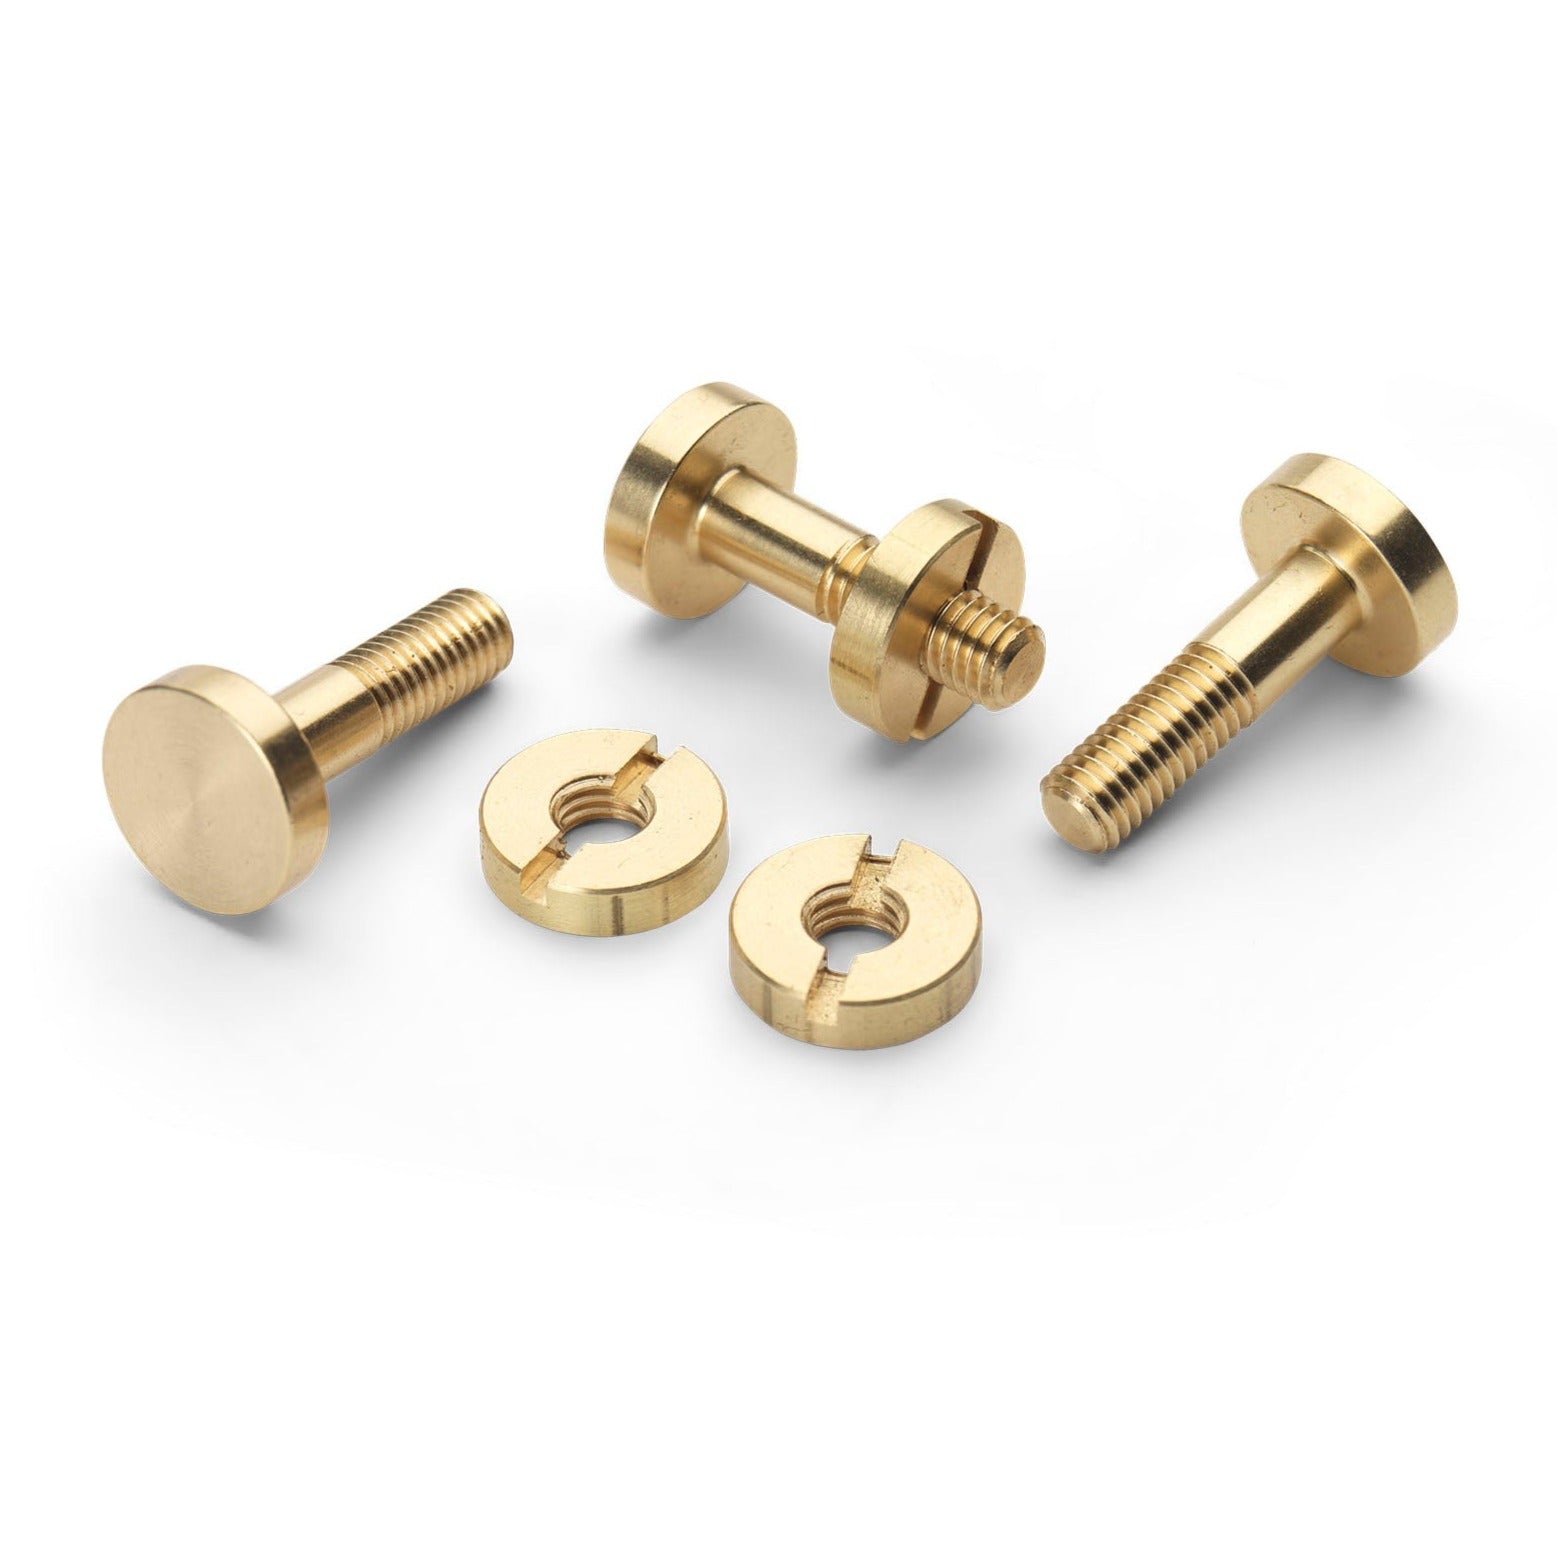 Brass flare nut short neck fitting for heavy machinery, and